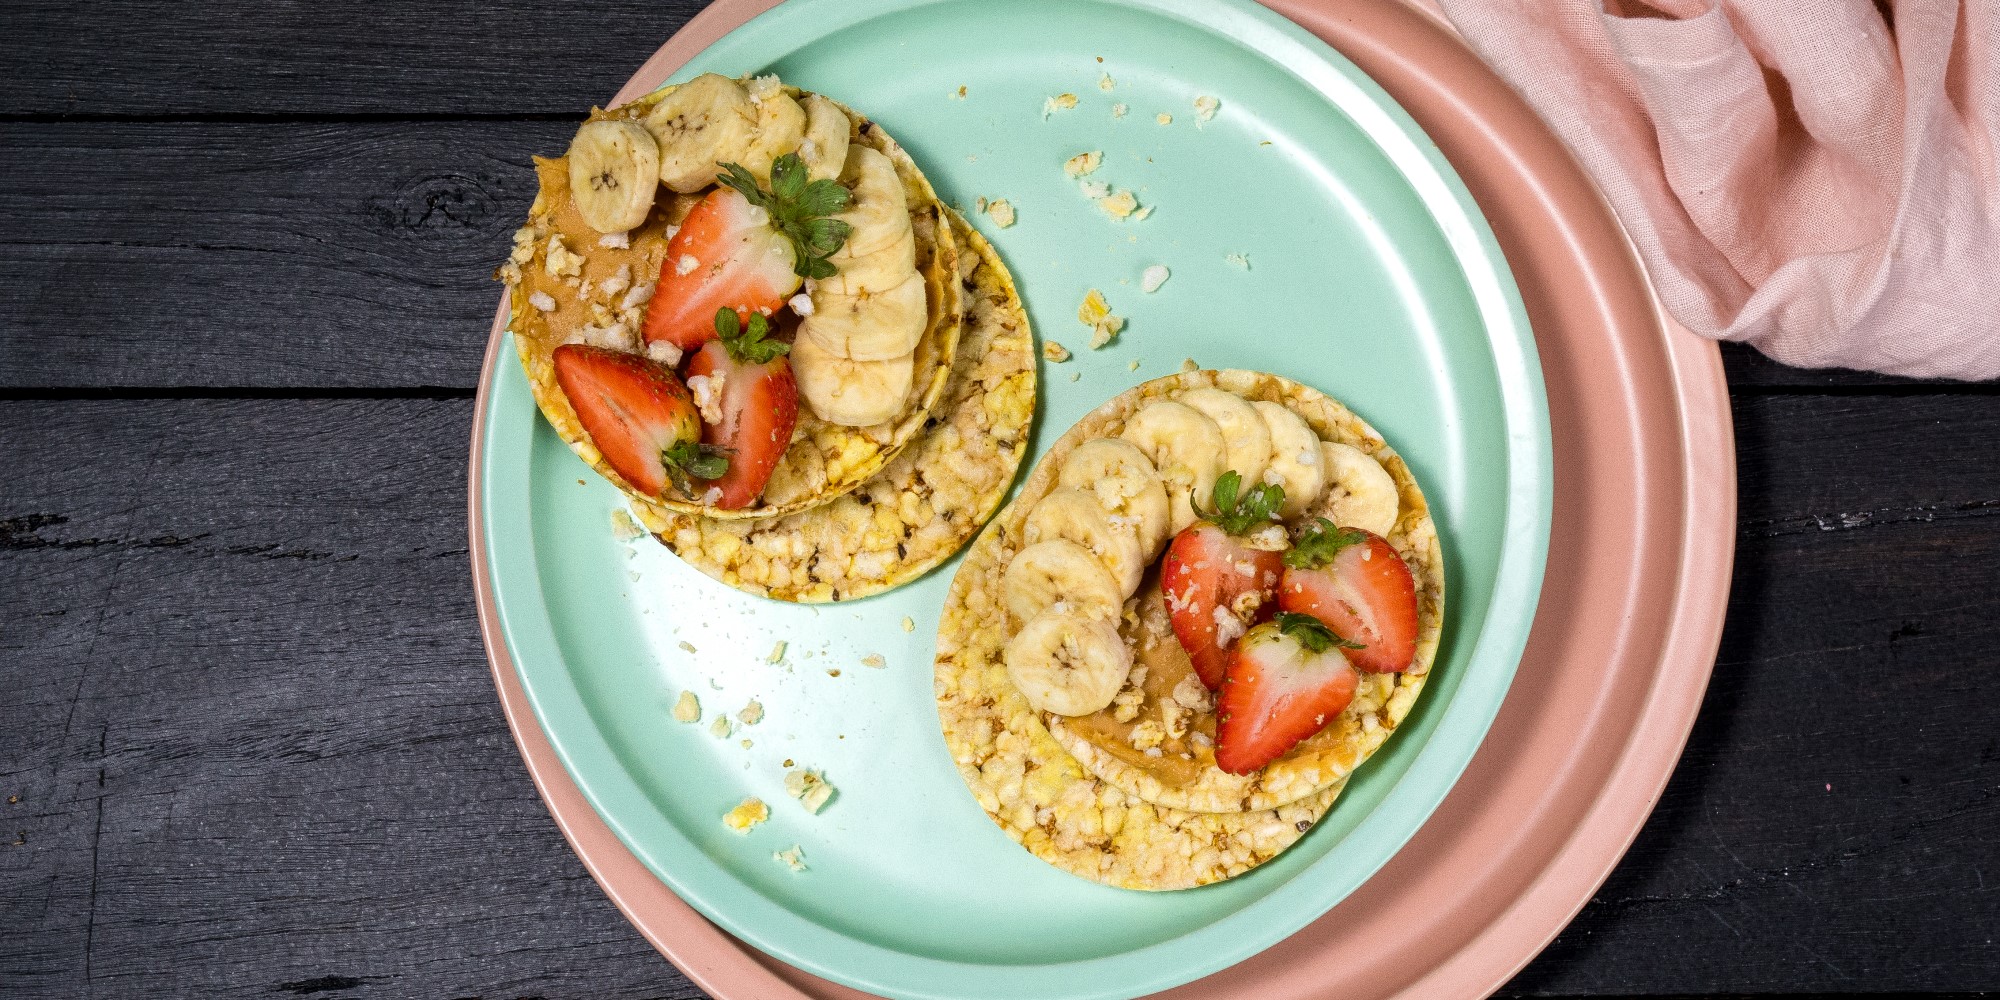 Peanut butter, strawberry & banana on Corn Thins slices